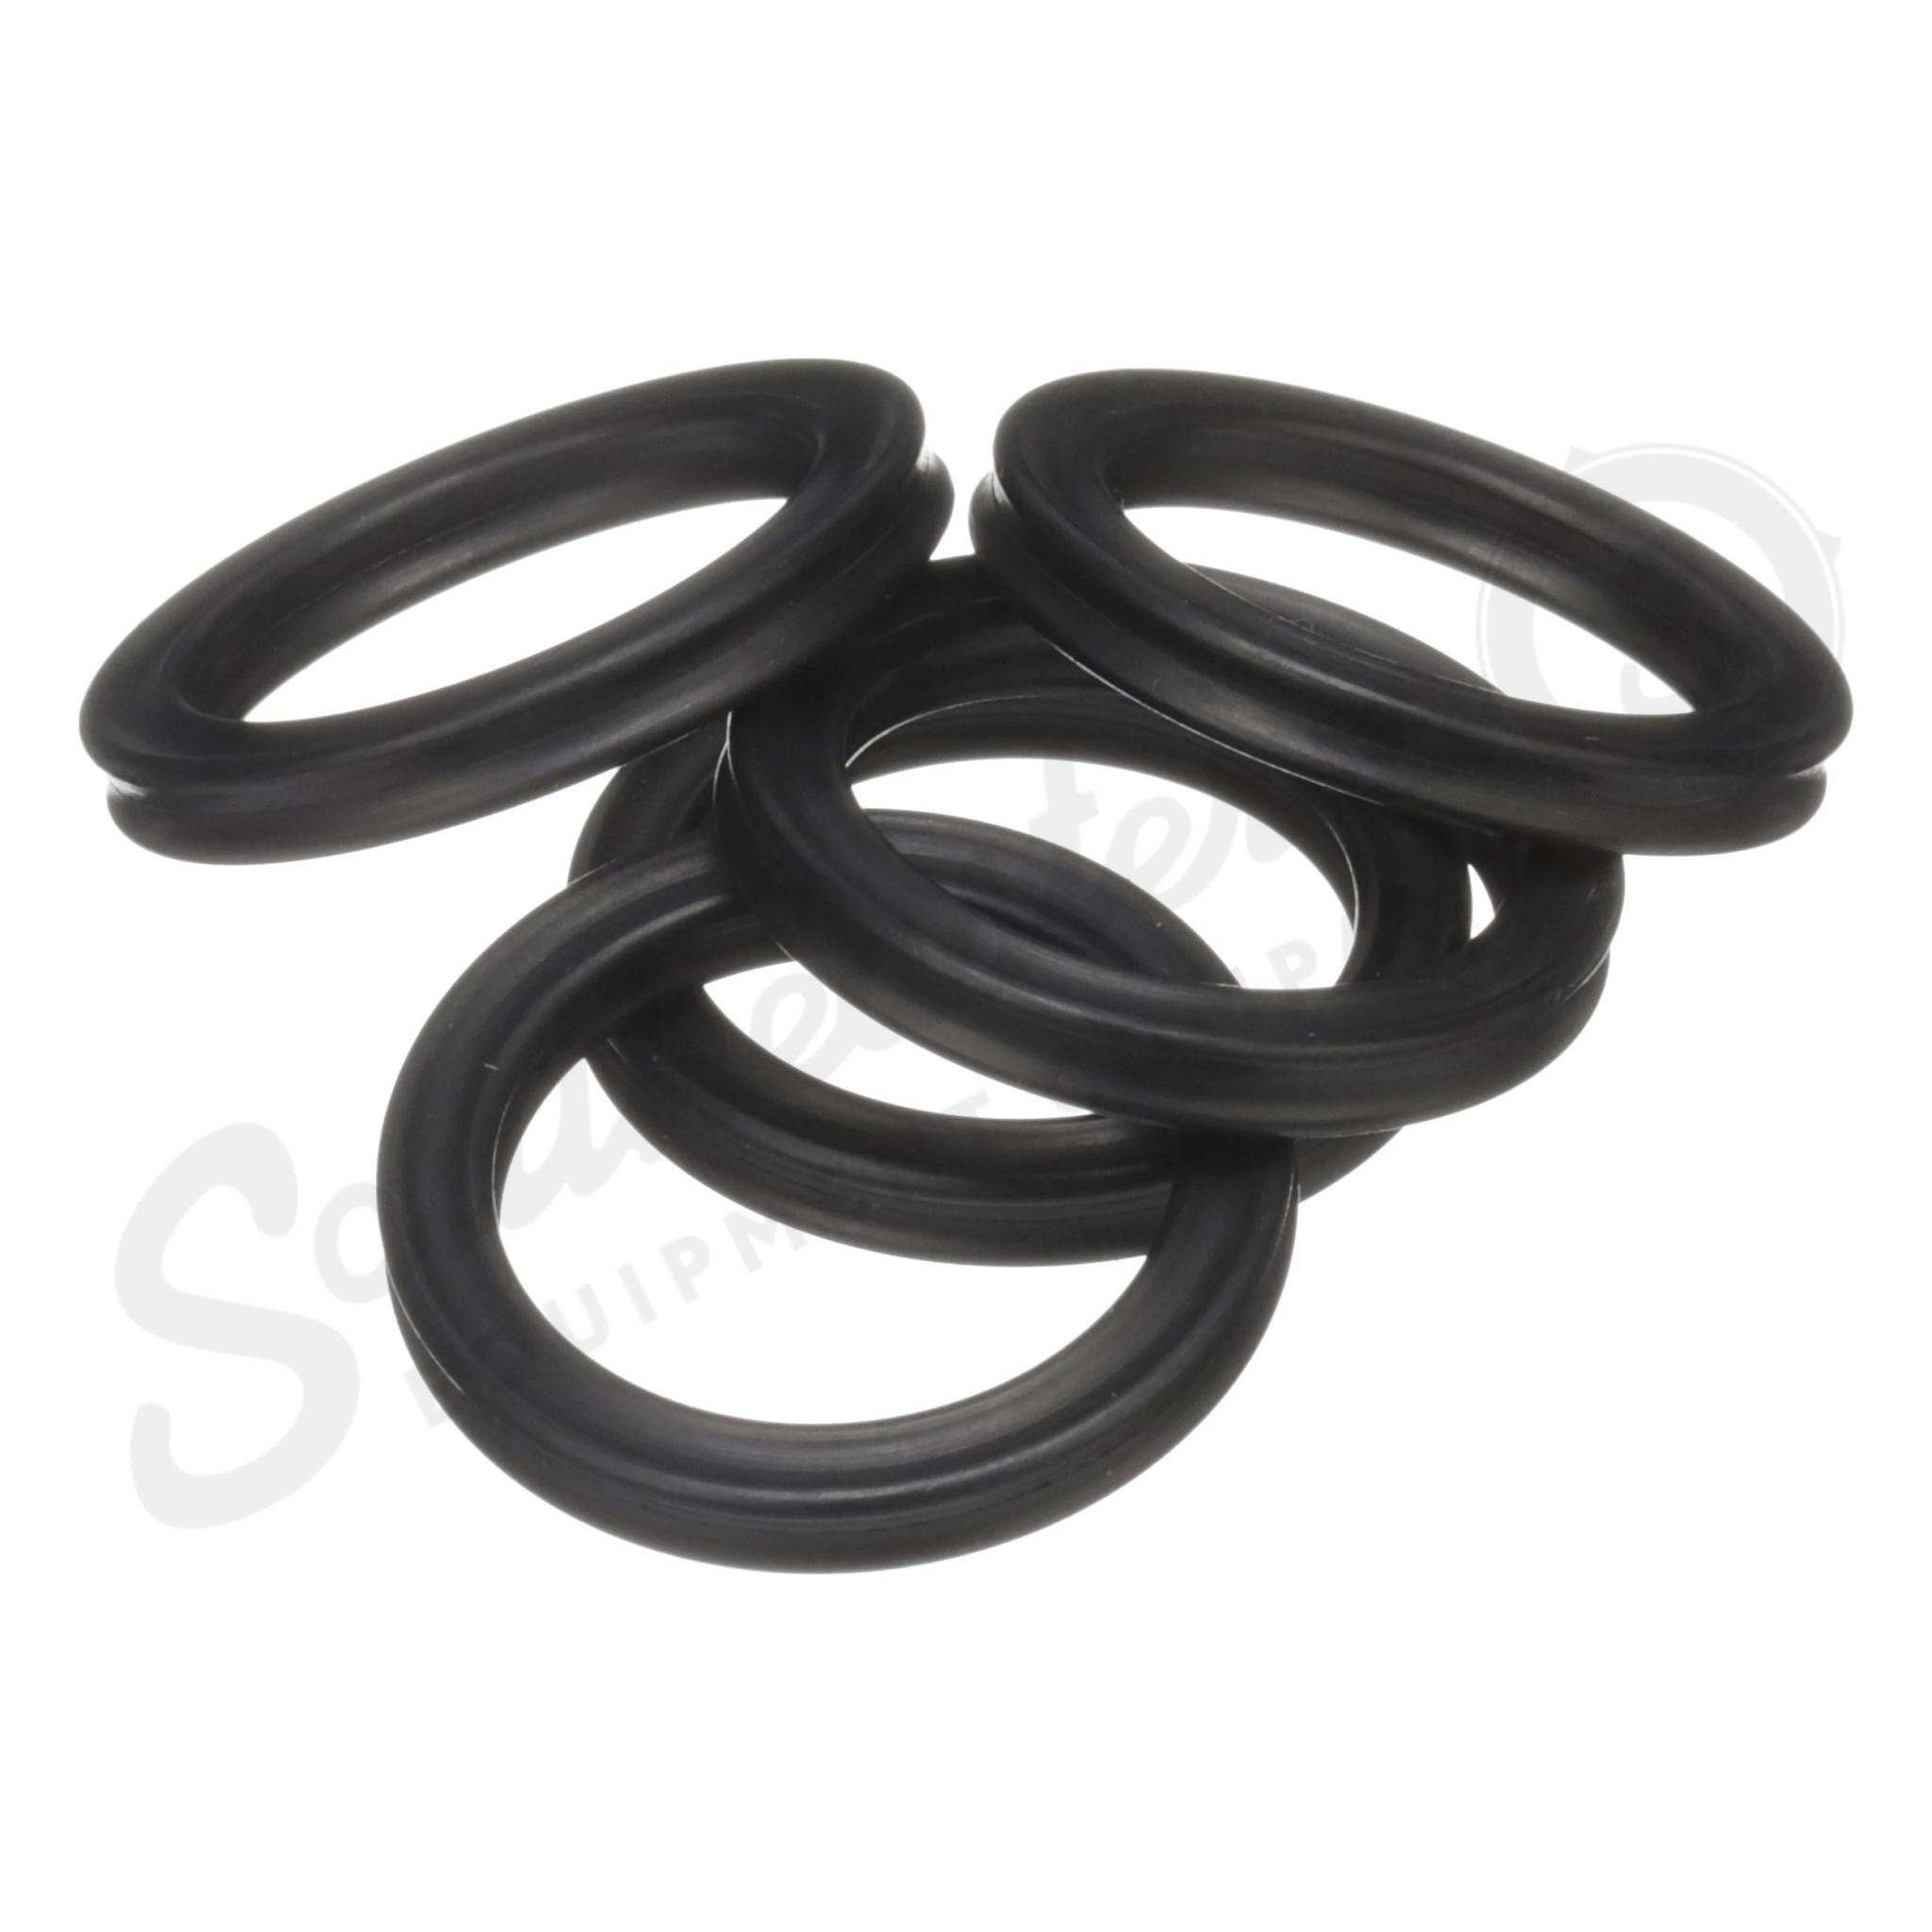 10 Pcs Black Rubber Oil Filter Sealing O Ring Gasket 20mm x 17mm x 1.5mm :  Amazon.in: Home & Kitchen